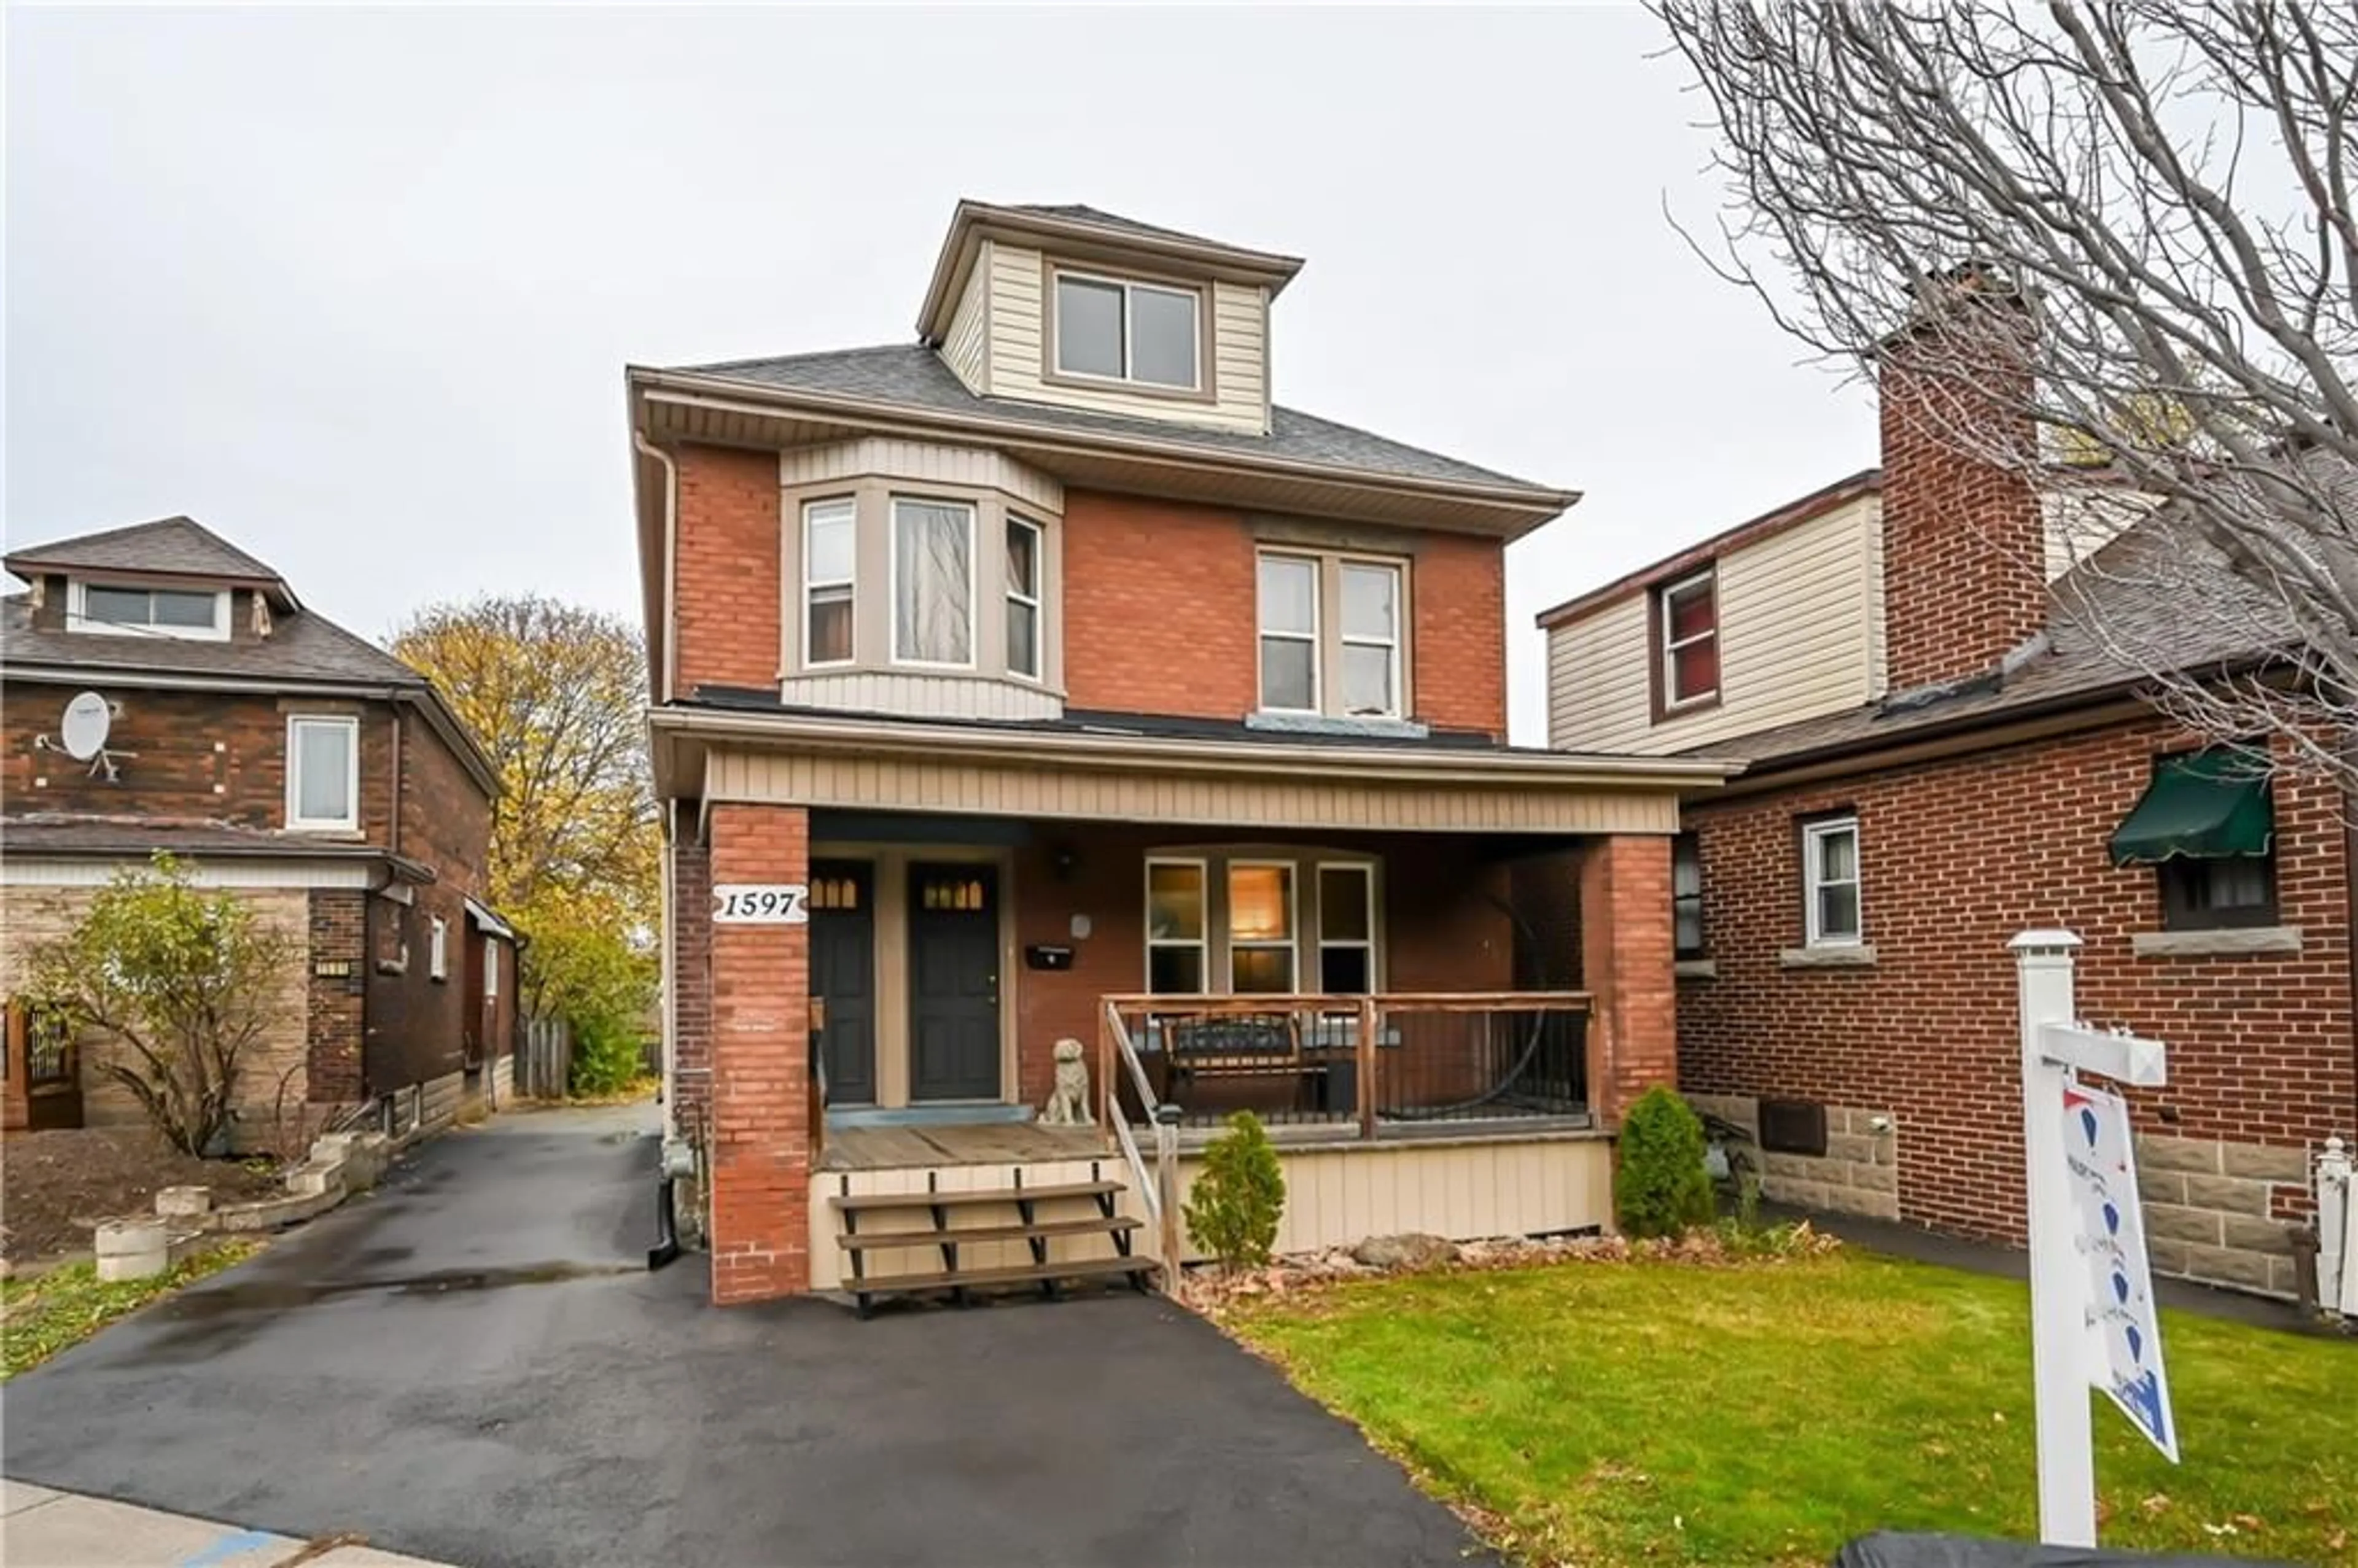 Home with brick exterior material for 1597 KING St, Hamilton Ontario L8K 1T5